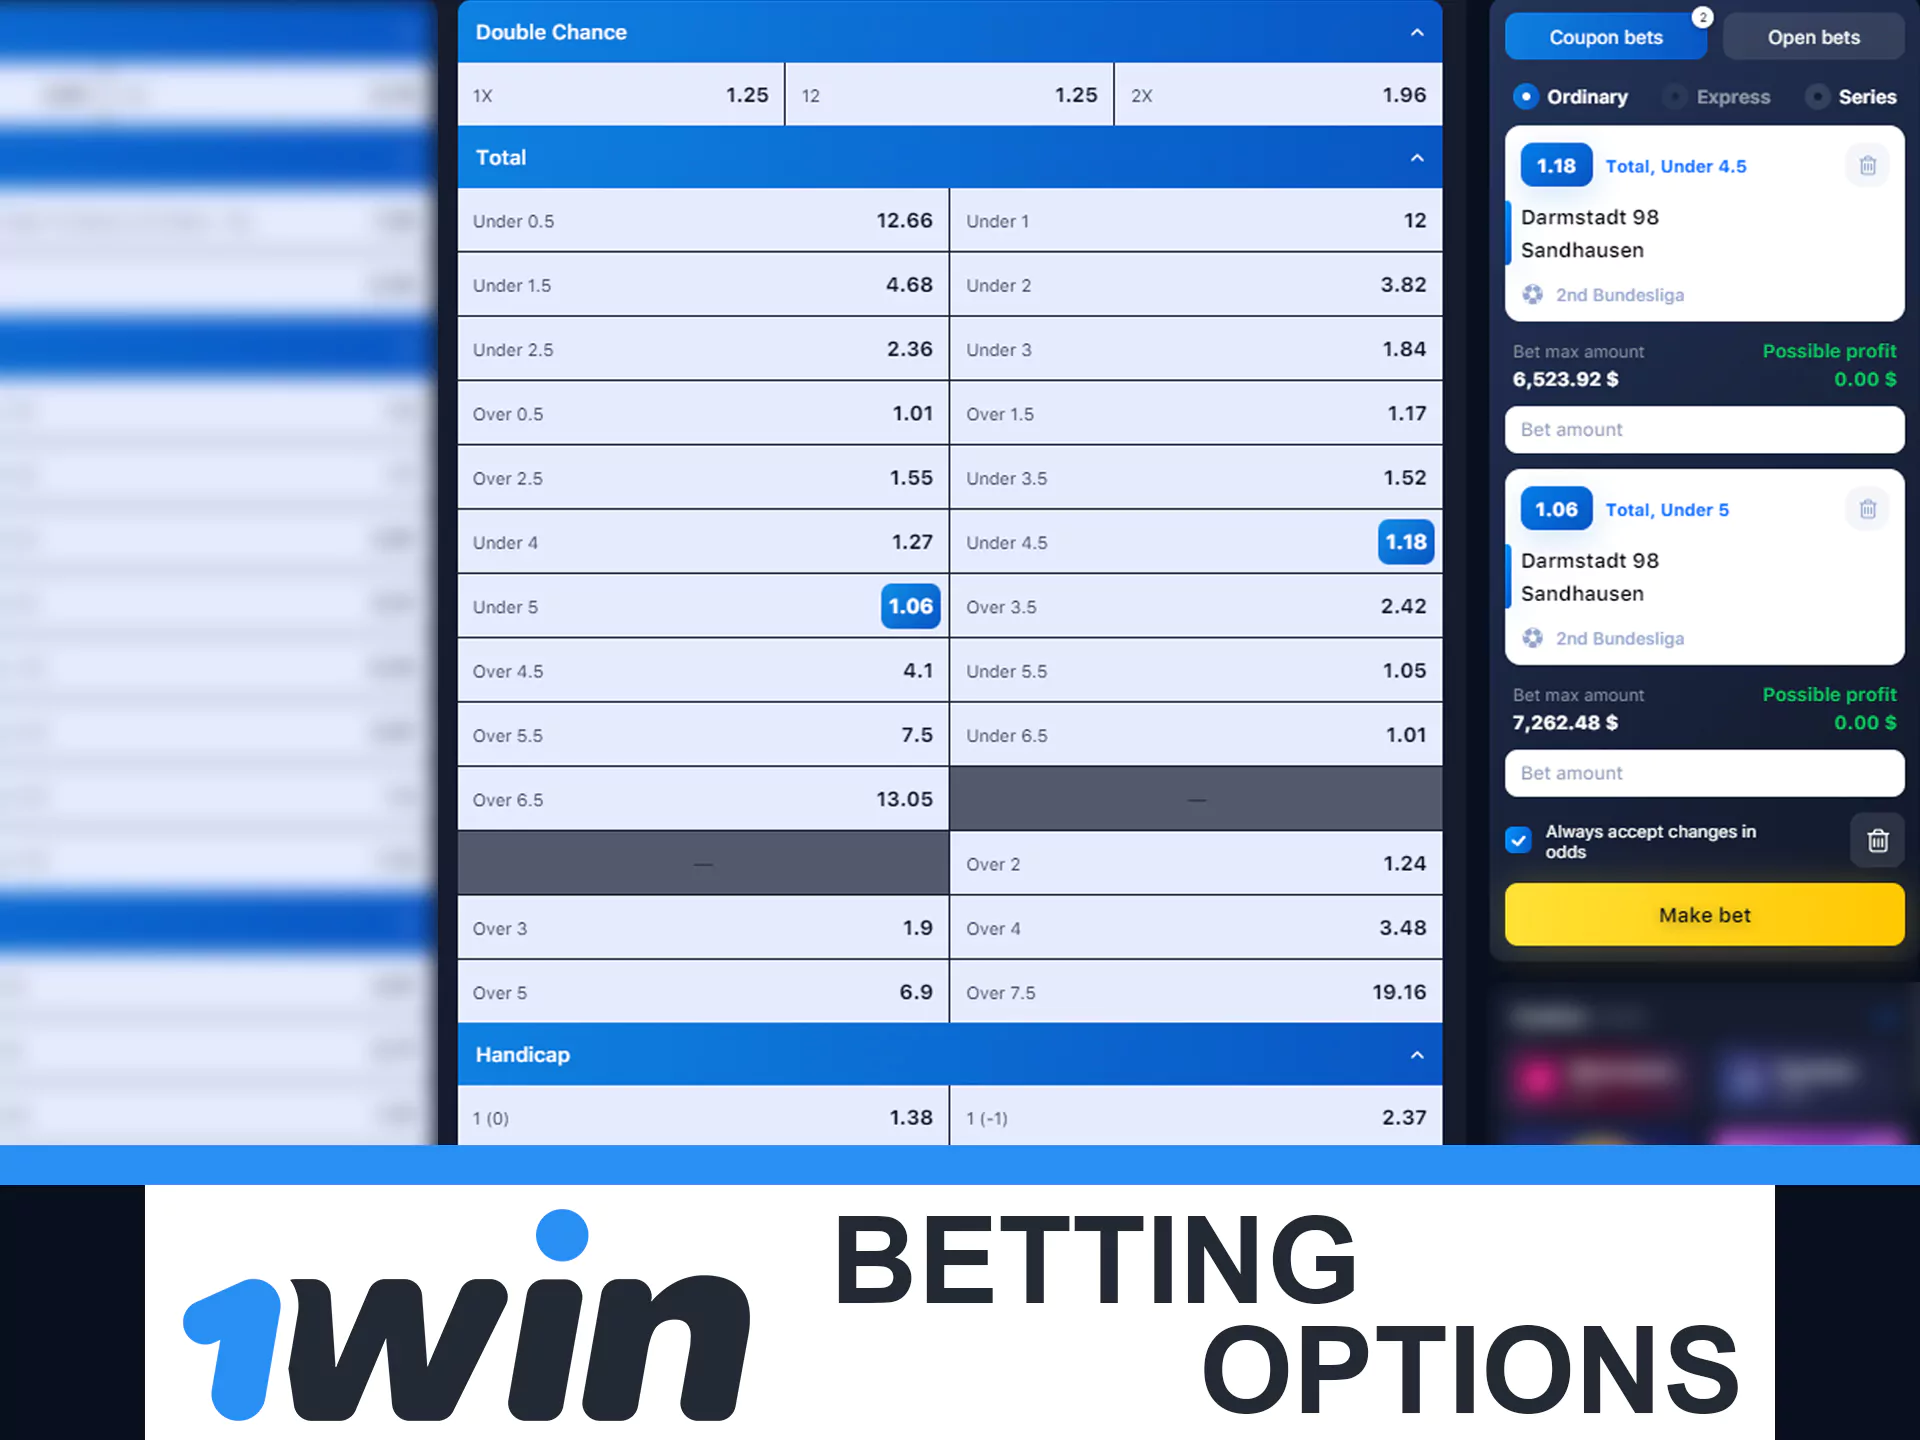 You can create your own custom bet at 1win.